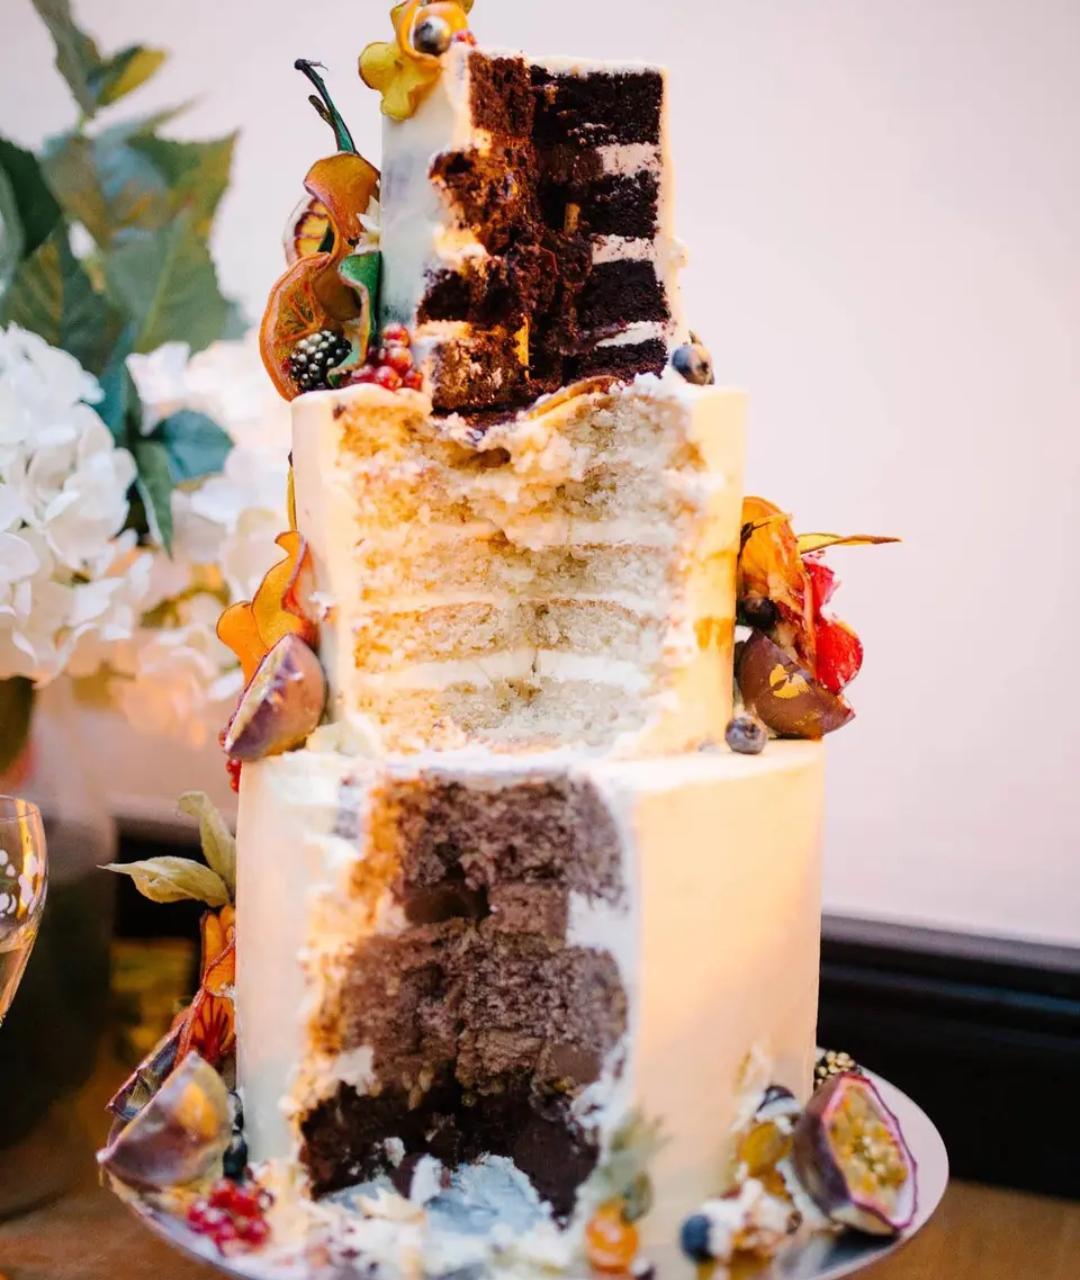 93 Unique Wedding Cake Flavours From Traditional to Unique - hitched.co.uk - hitched.co.uk